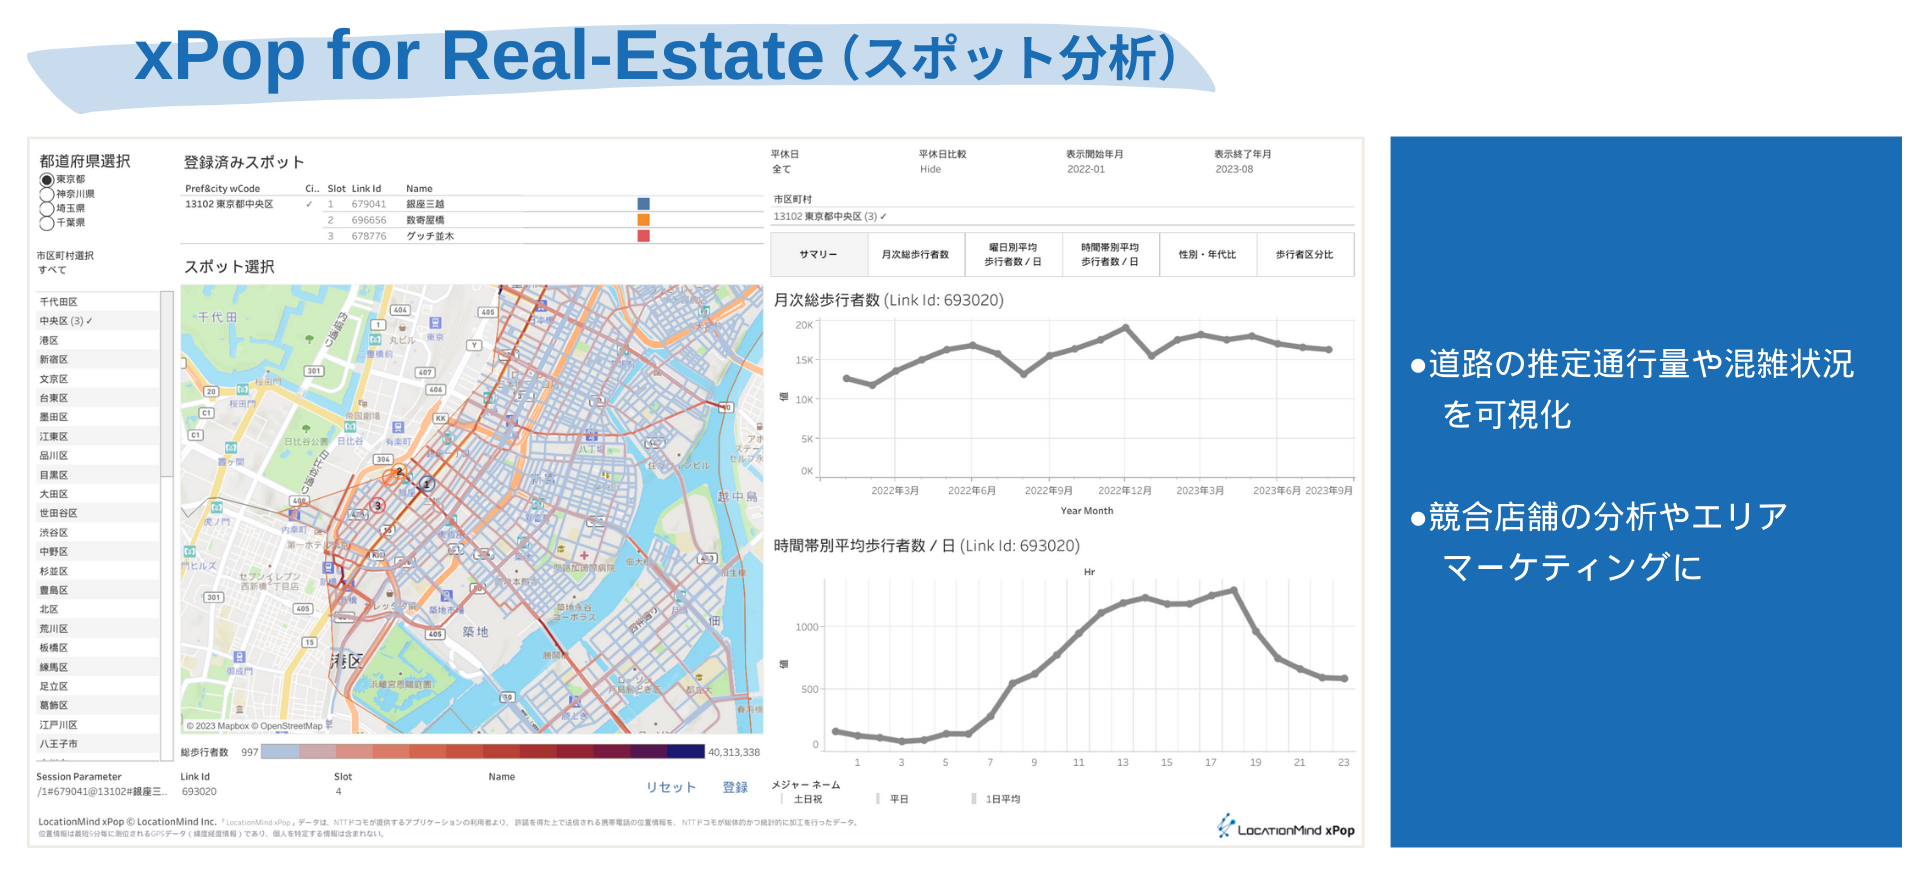 xPop for Real-Estate スポット